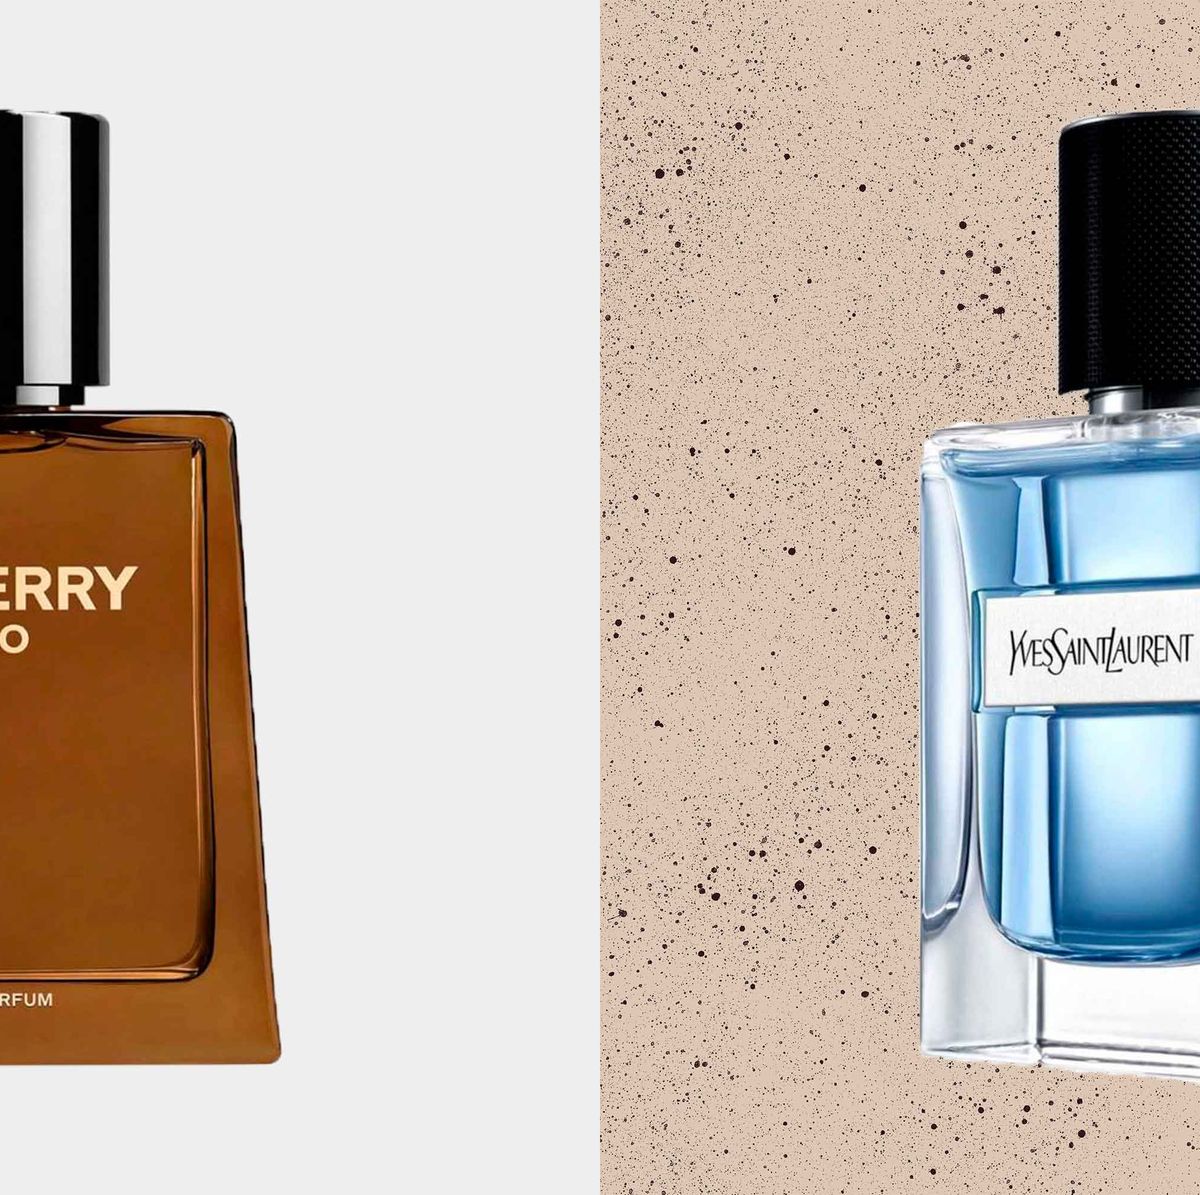 Les Colognes Louis Vuitton Is The Brand's First Unisex Fragrance Collection  & Features 3 Summer-Ready Scents